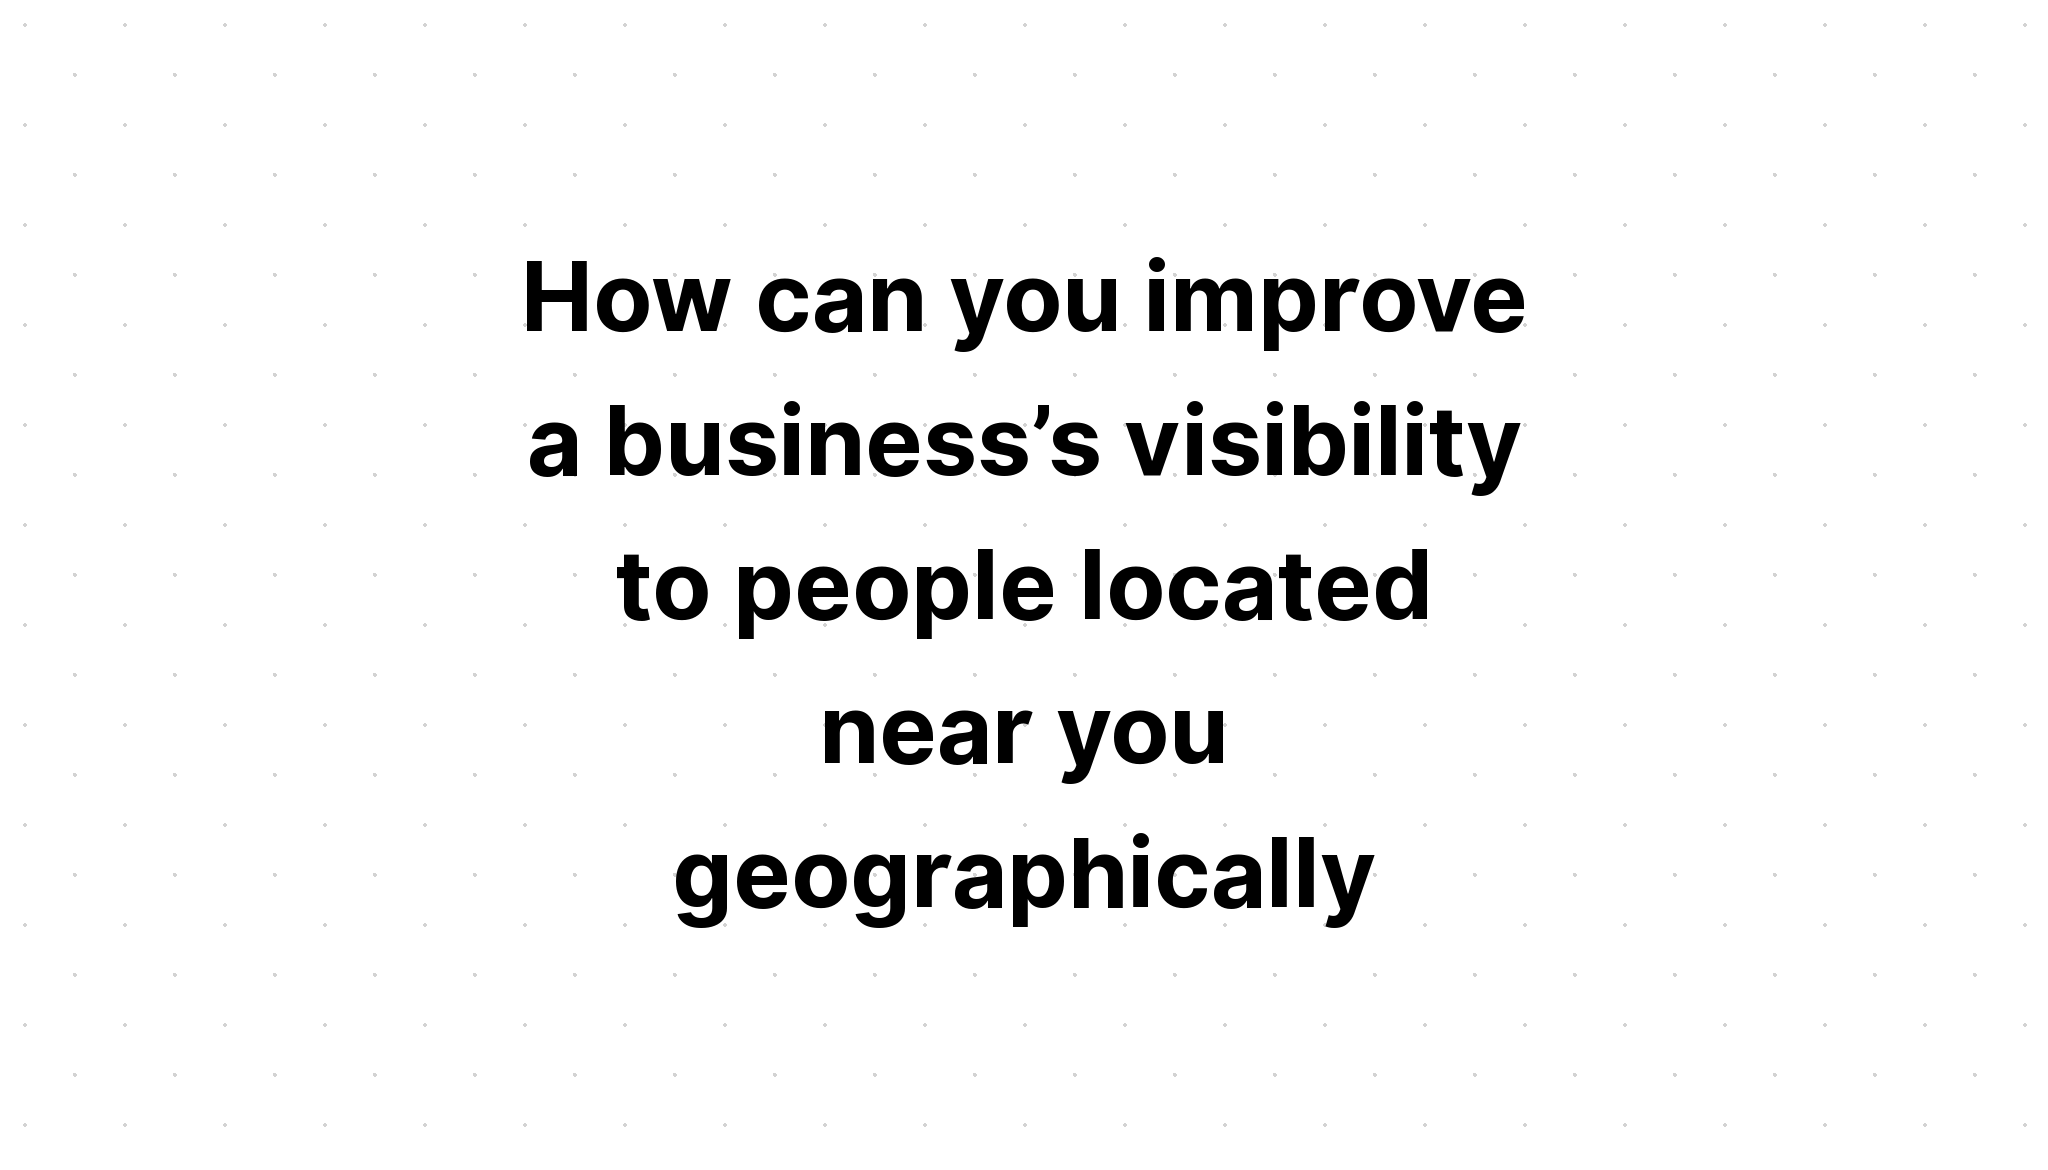 How can you improve a business’s visibility to people located near you